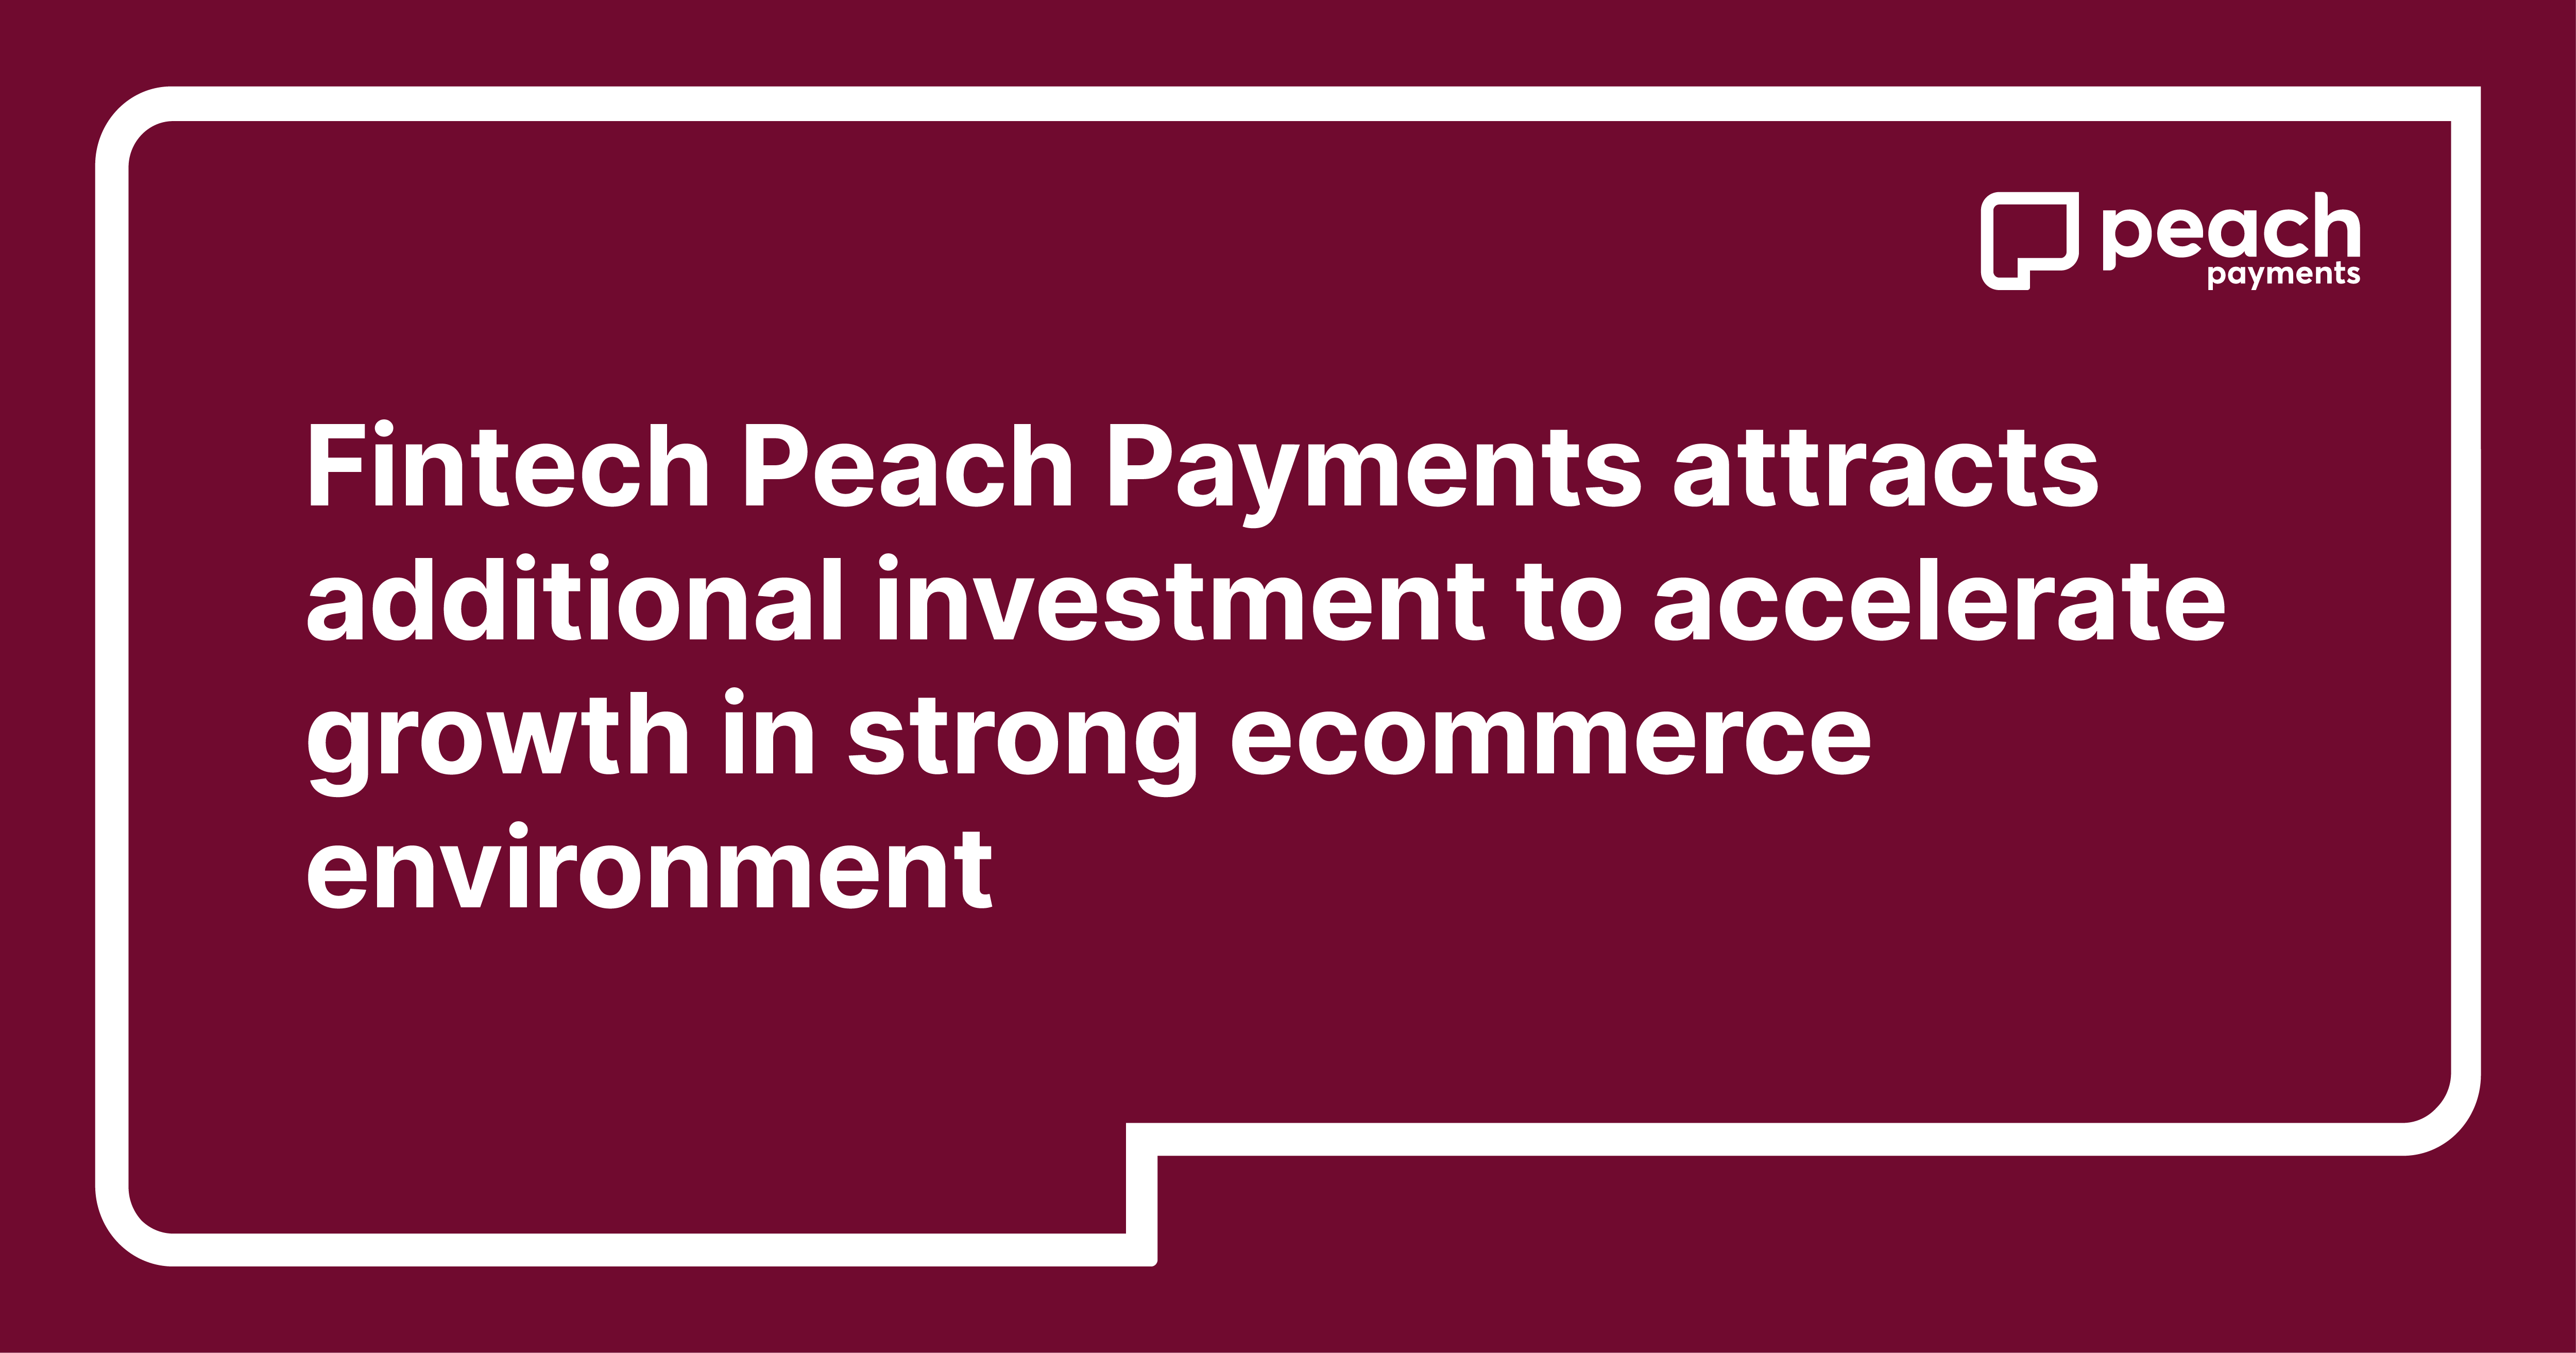 Fintech Peach Payments attracts investment to accelerate growth